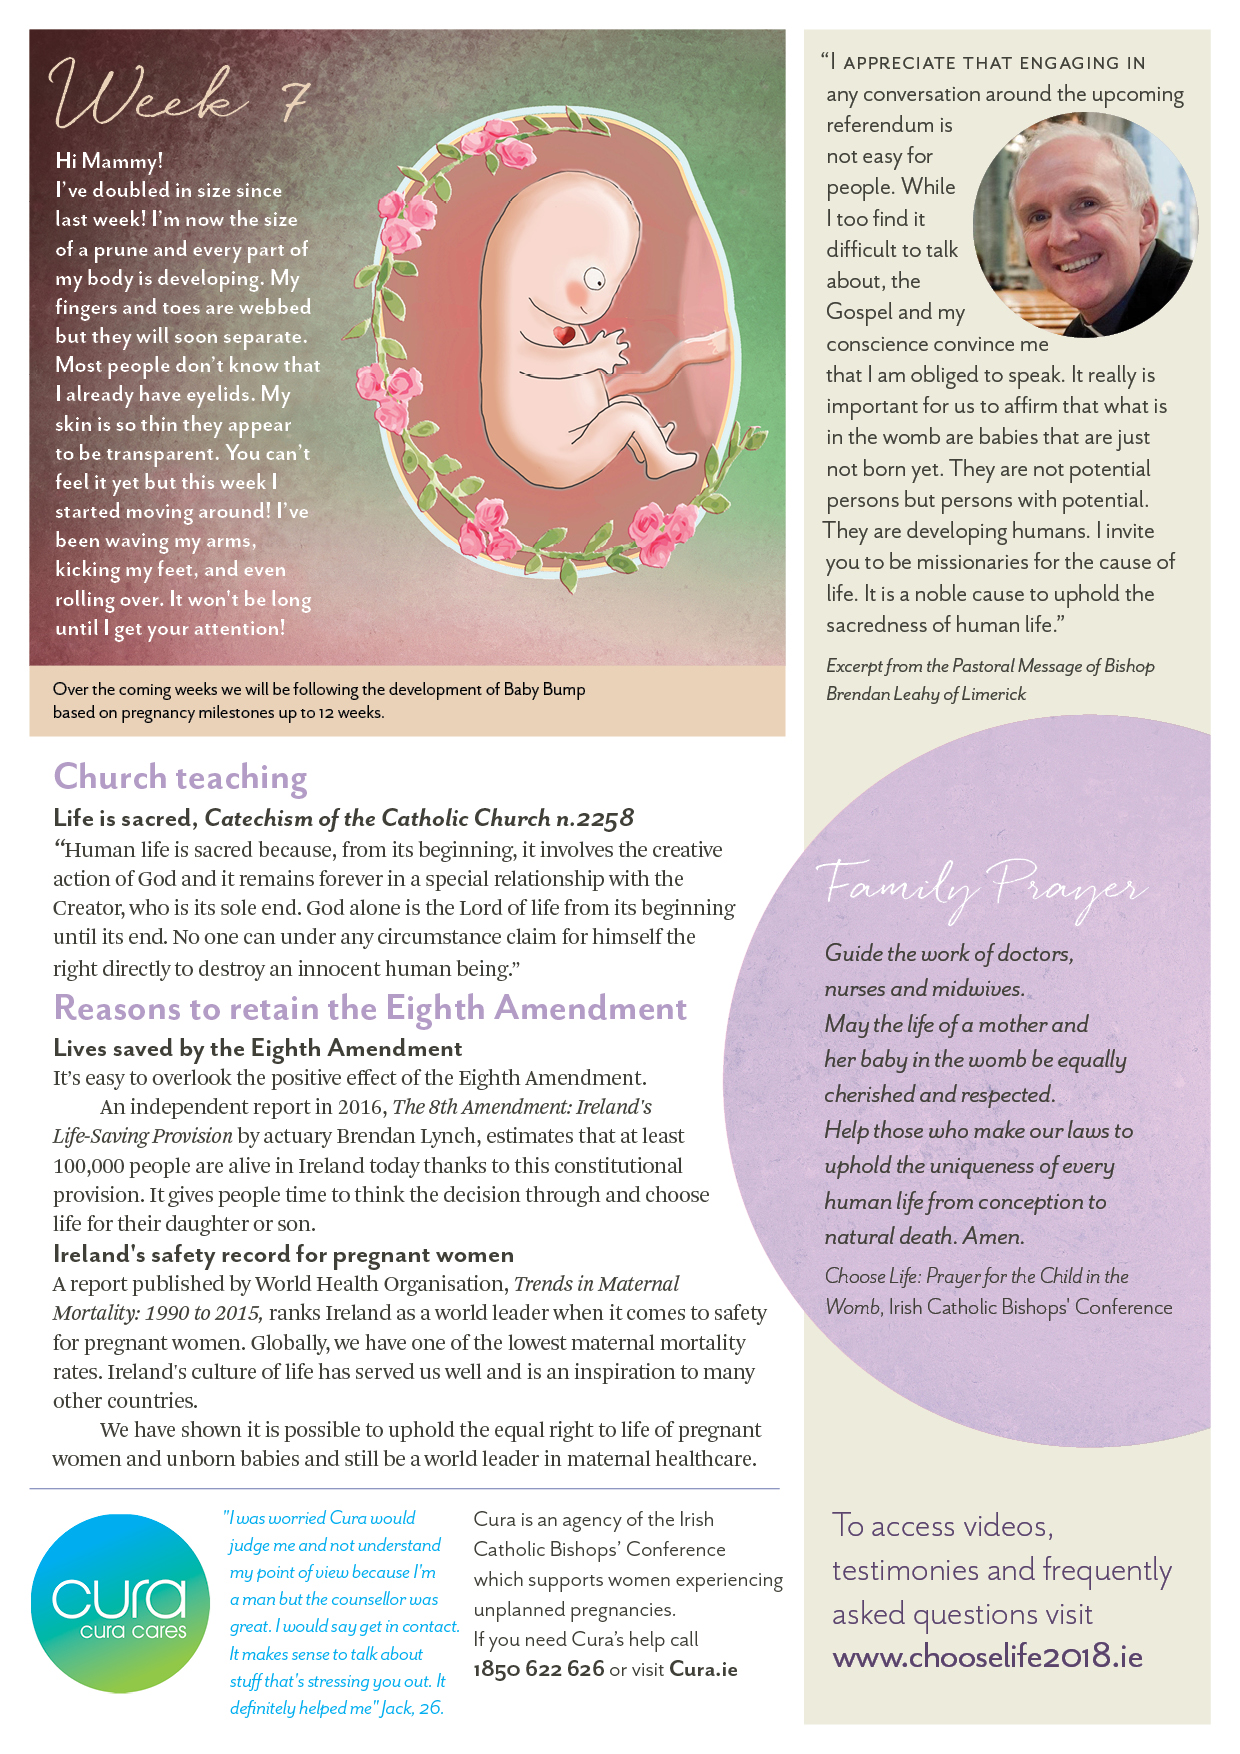 ChooseLife2018_Issue4_p2